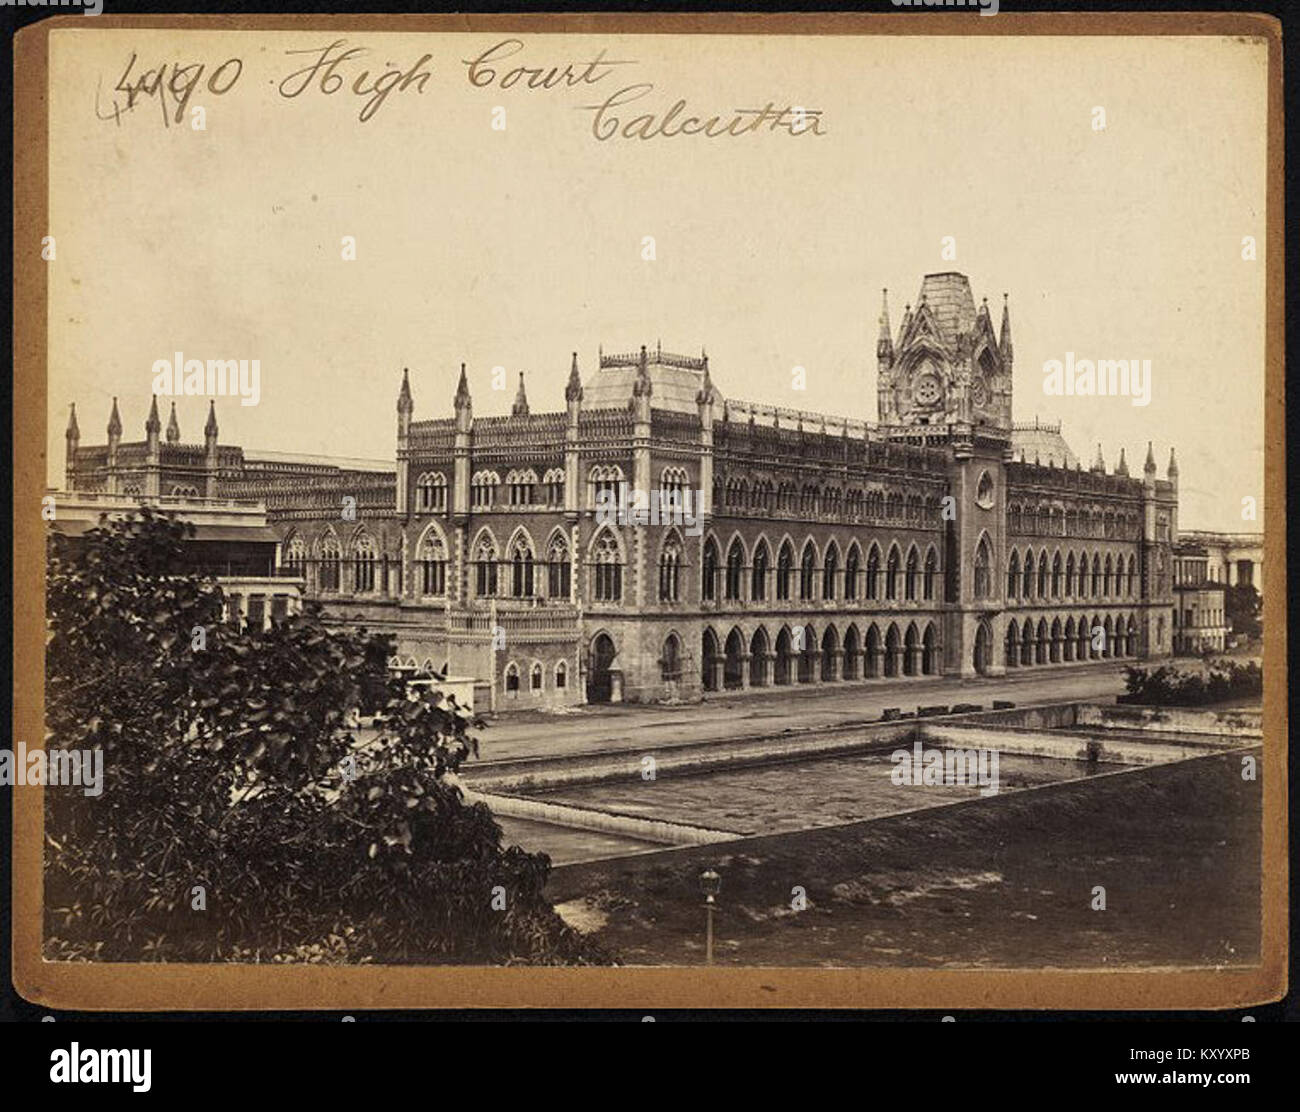 High Court of Calcutta (Third view) by Francis Frith Stock Photo